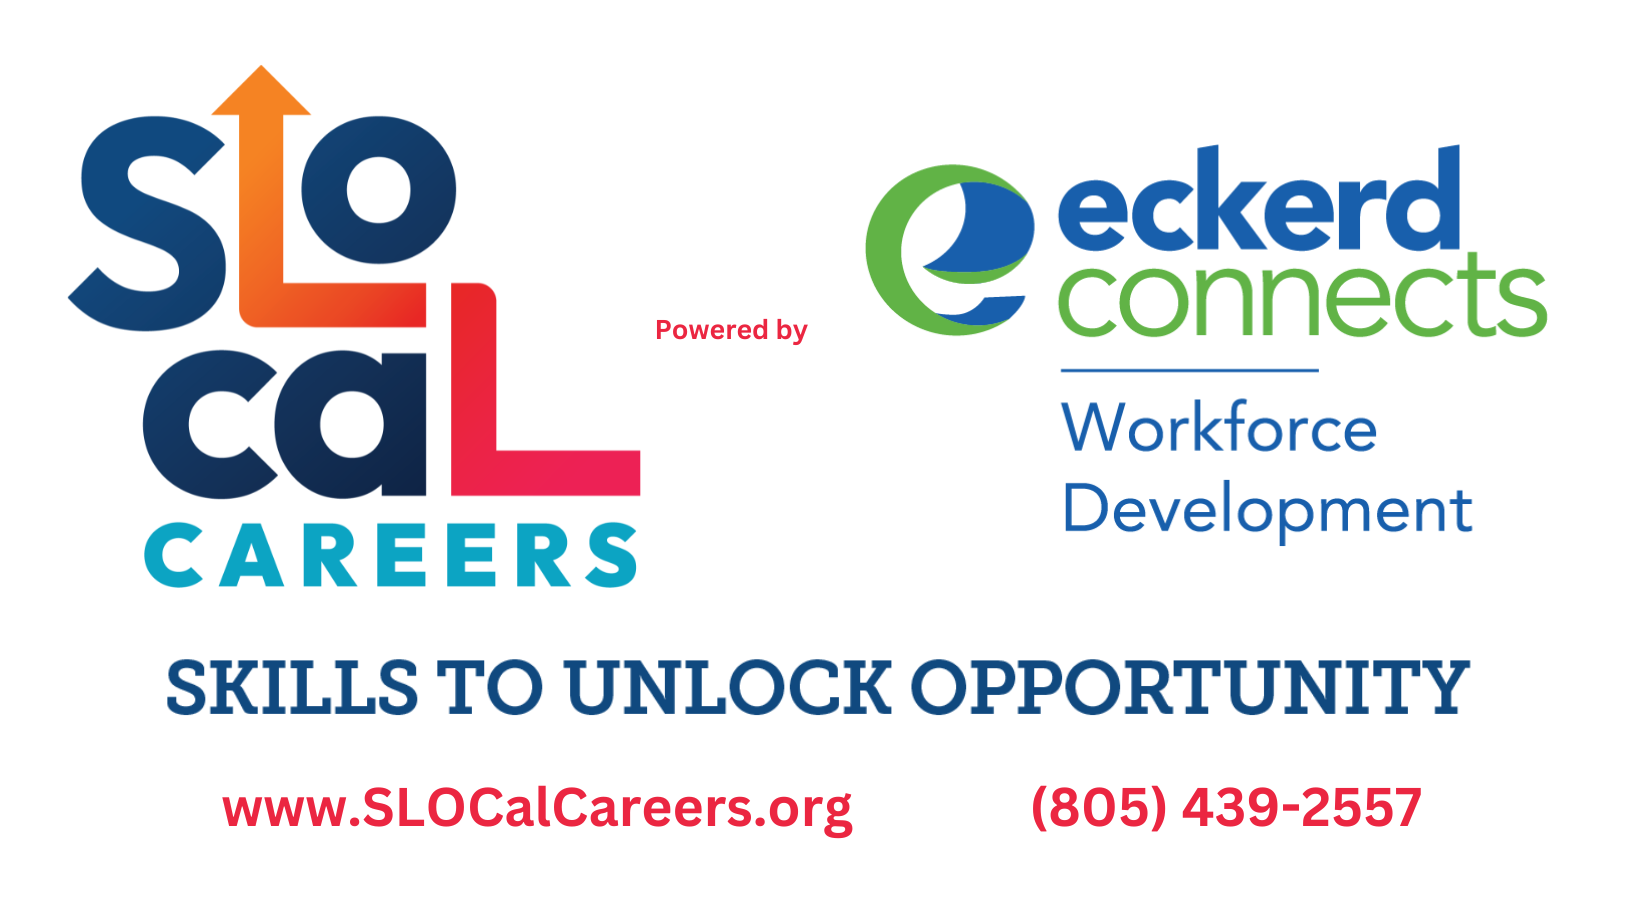 SLO Cal Careers Logo Click to view article, SLO Cal Careers Provides 10 Full Scholarships for Coding Bootcamp to San Luis Obispo County Residents